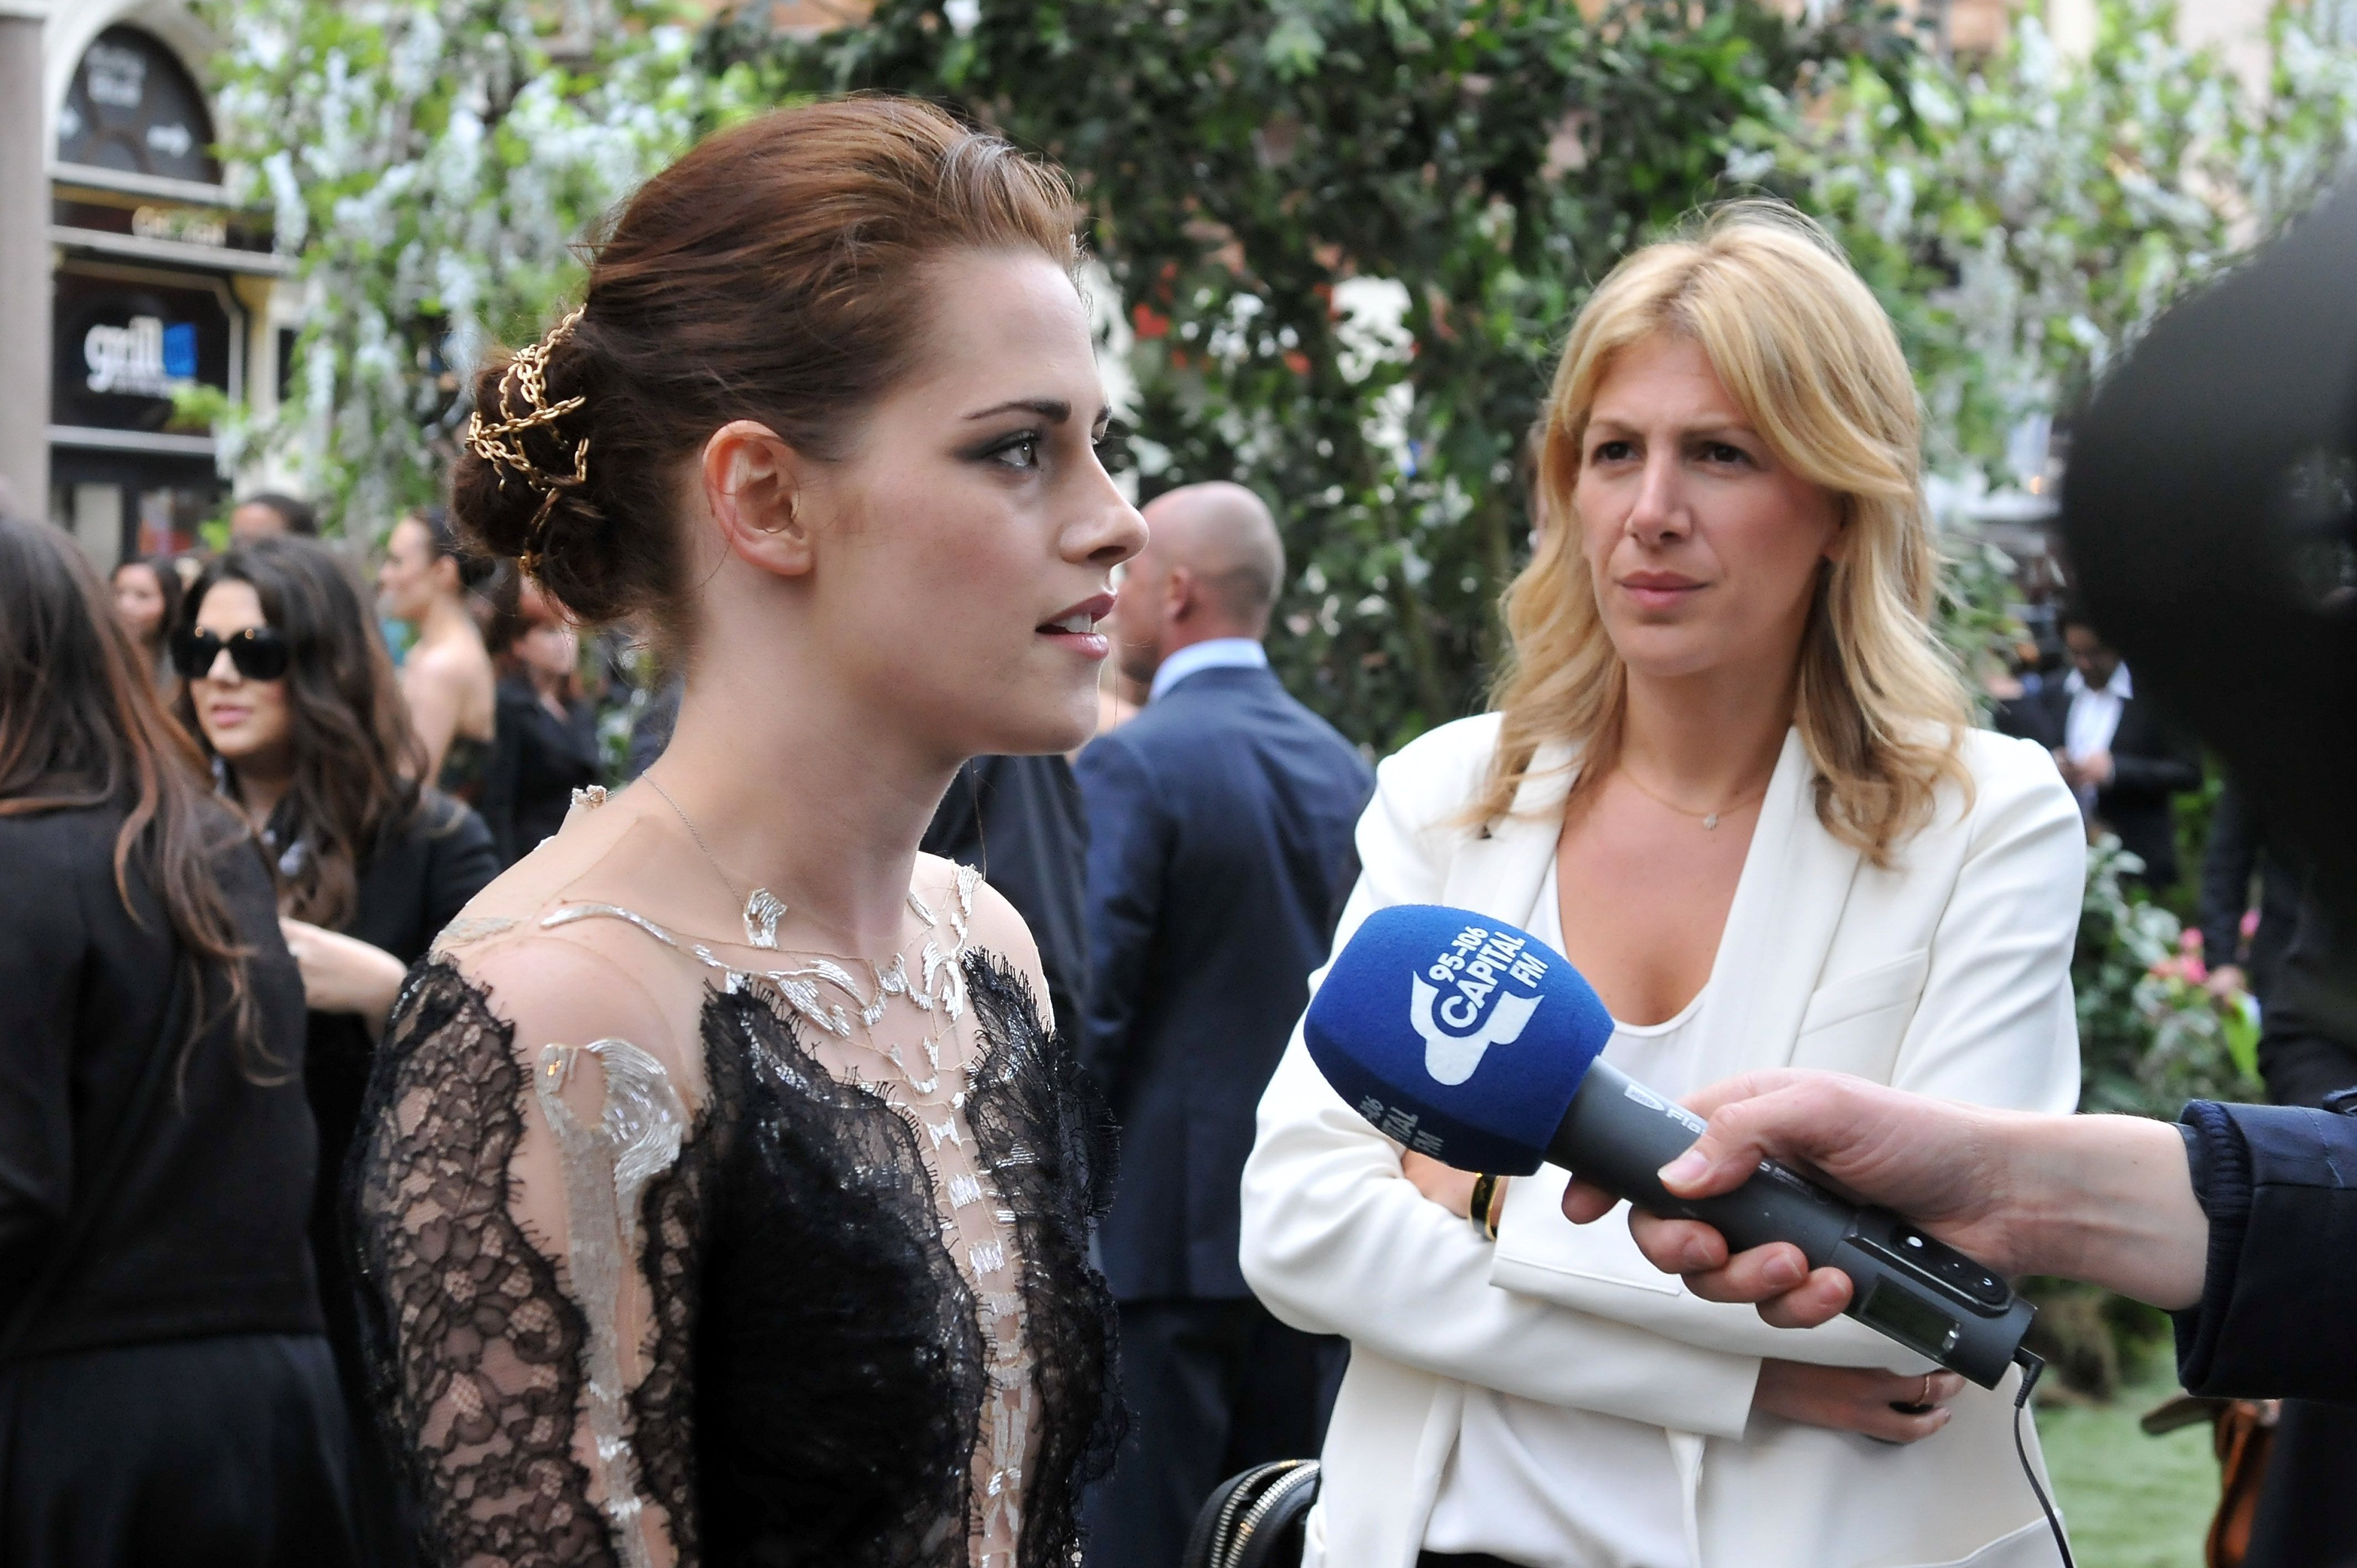 Actresses Kristen and Graff.